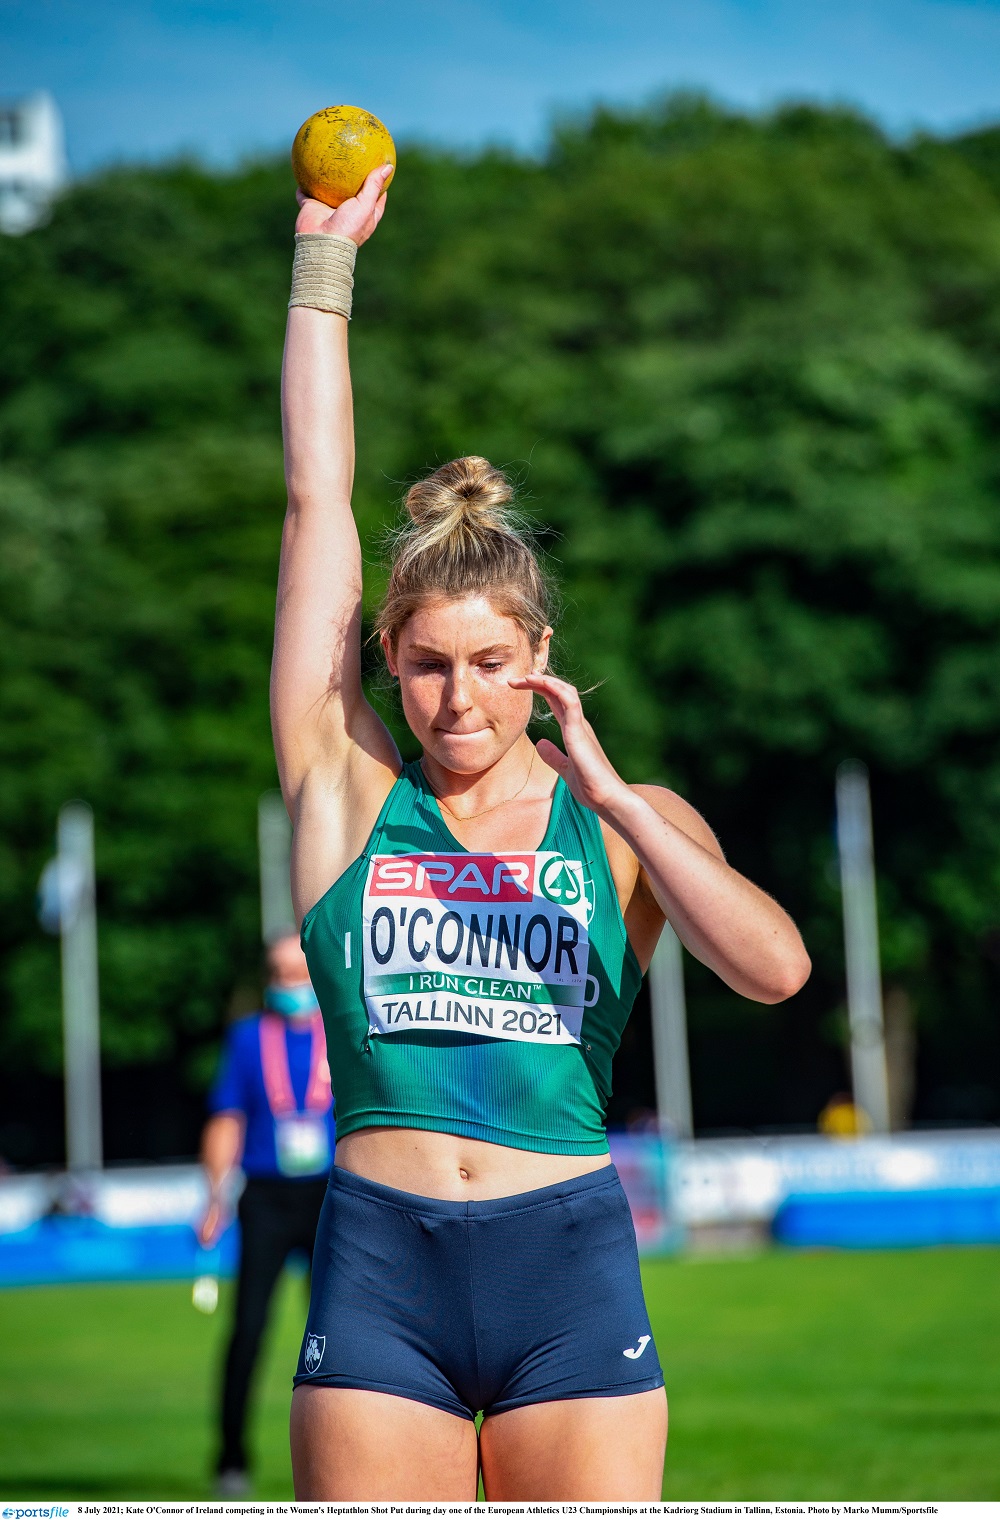 KATE O’CONNOR WITHDRAWS FROM EUROPEAN CHAMPIONSHIPS DUE TO INJURY